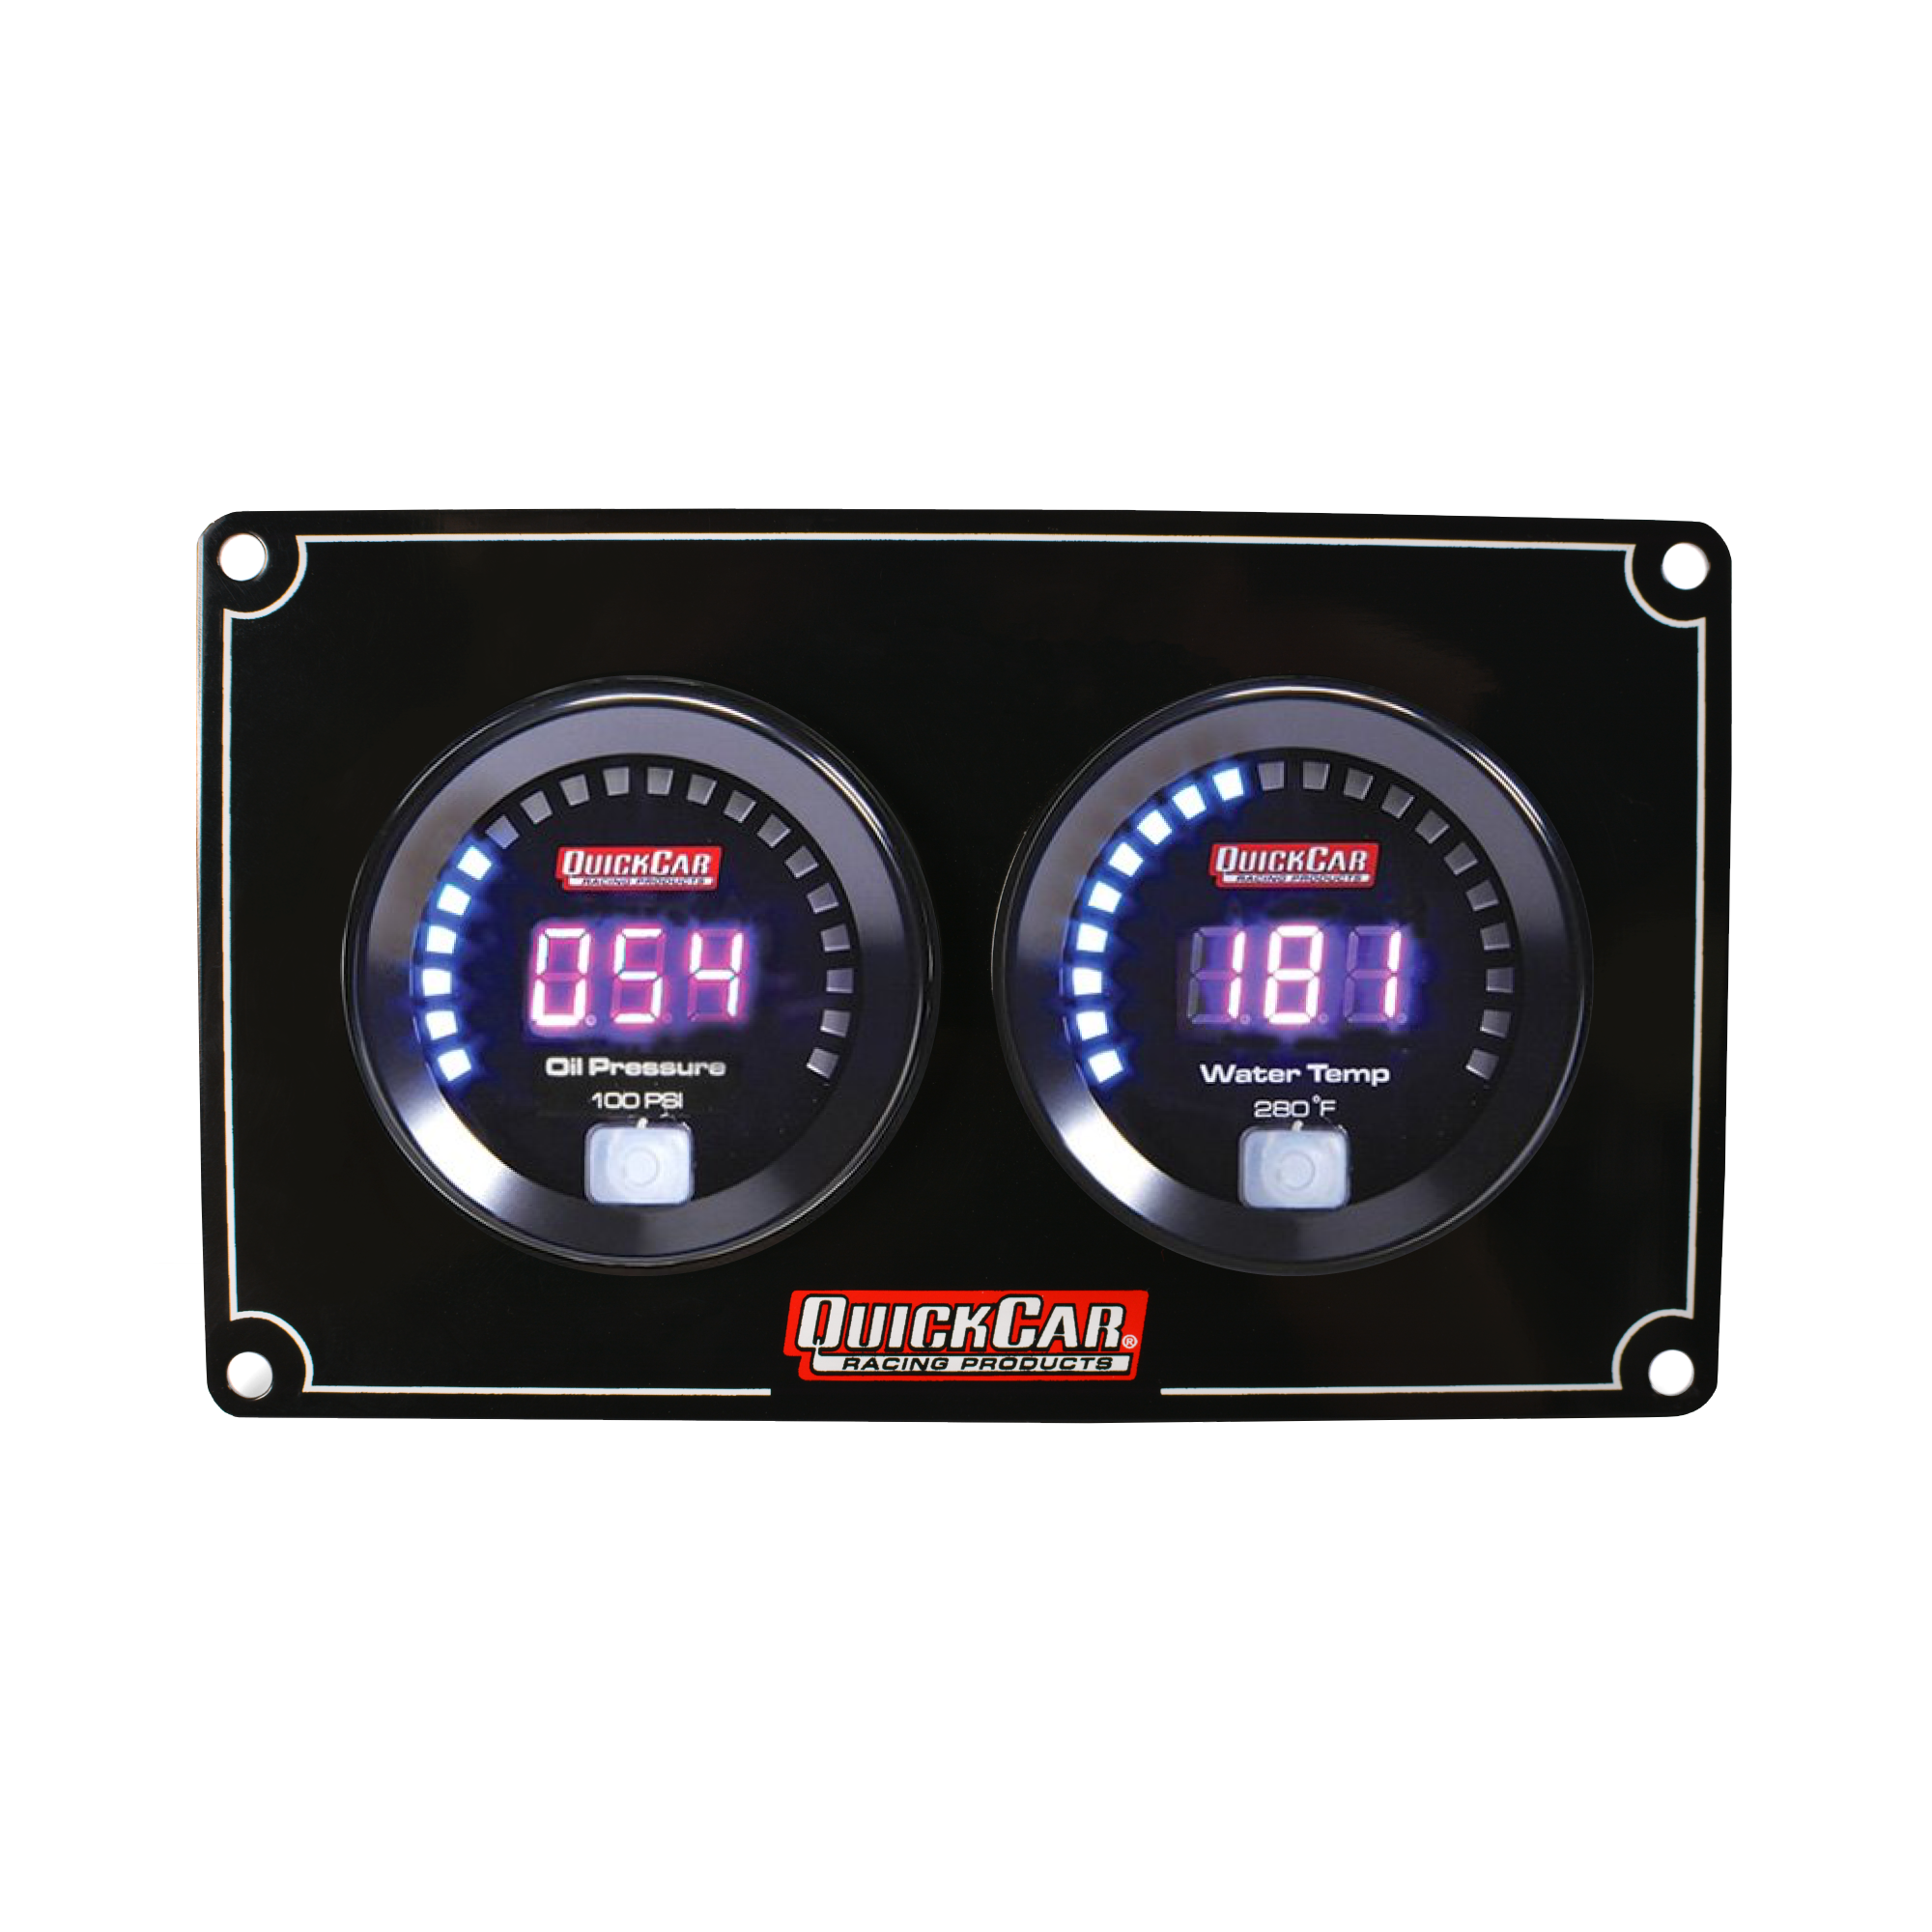 QuickCar Digital 2-Guage Panel OP/WT - JOES Racing Products